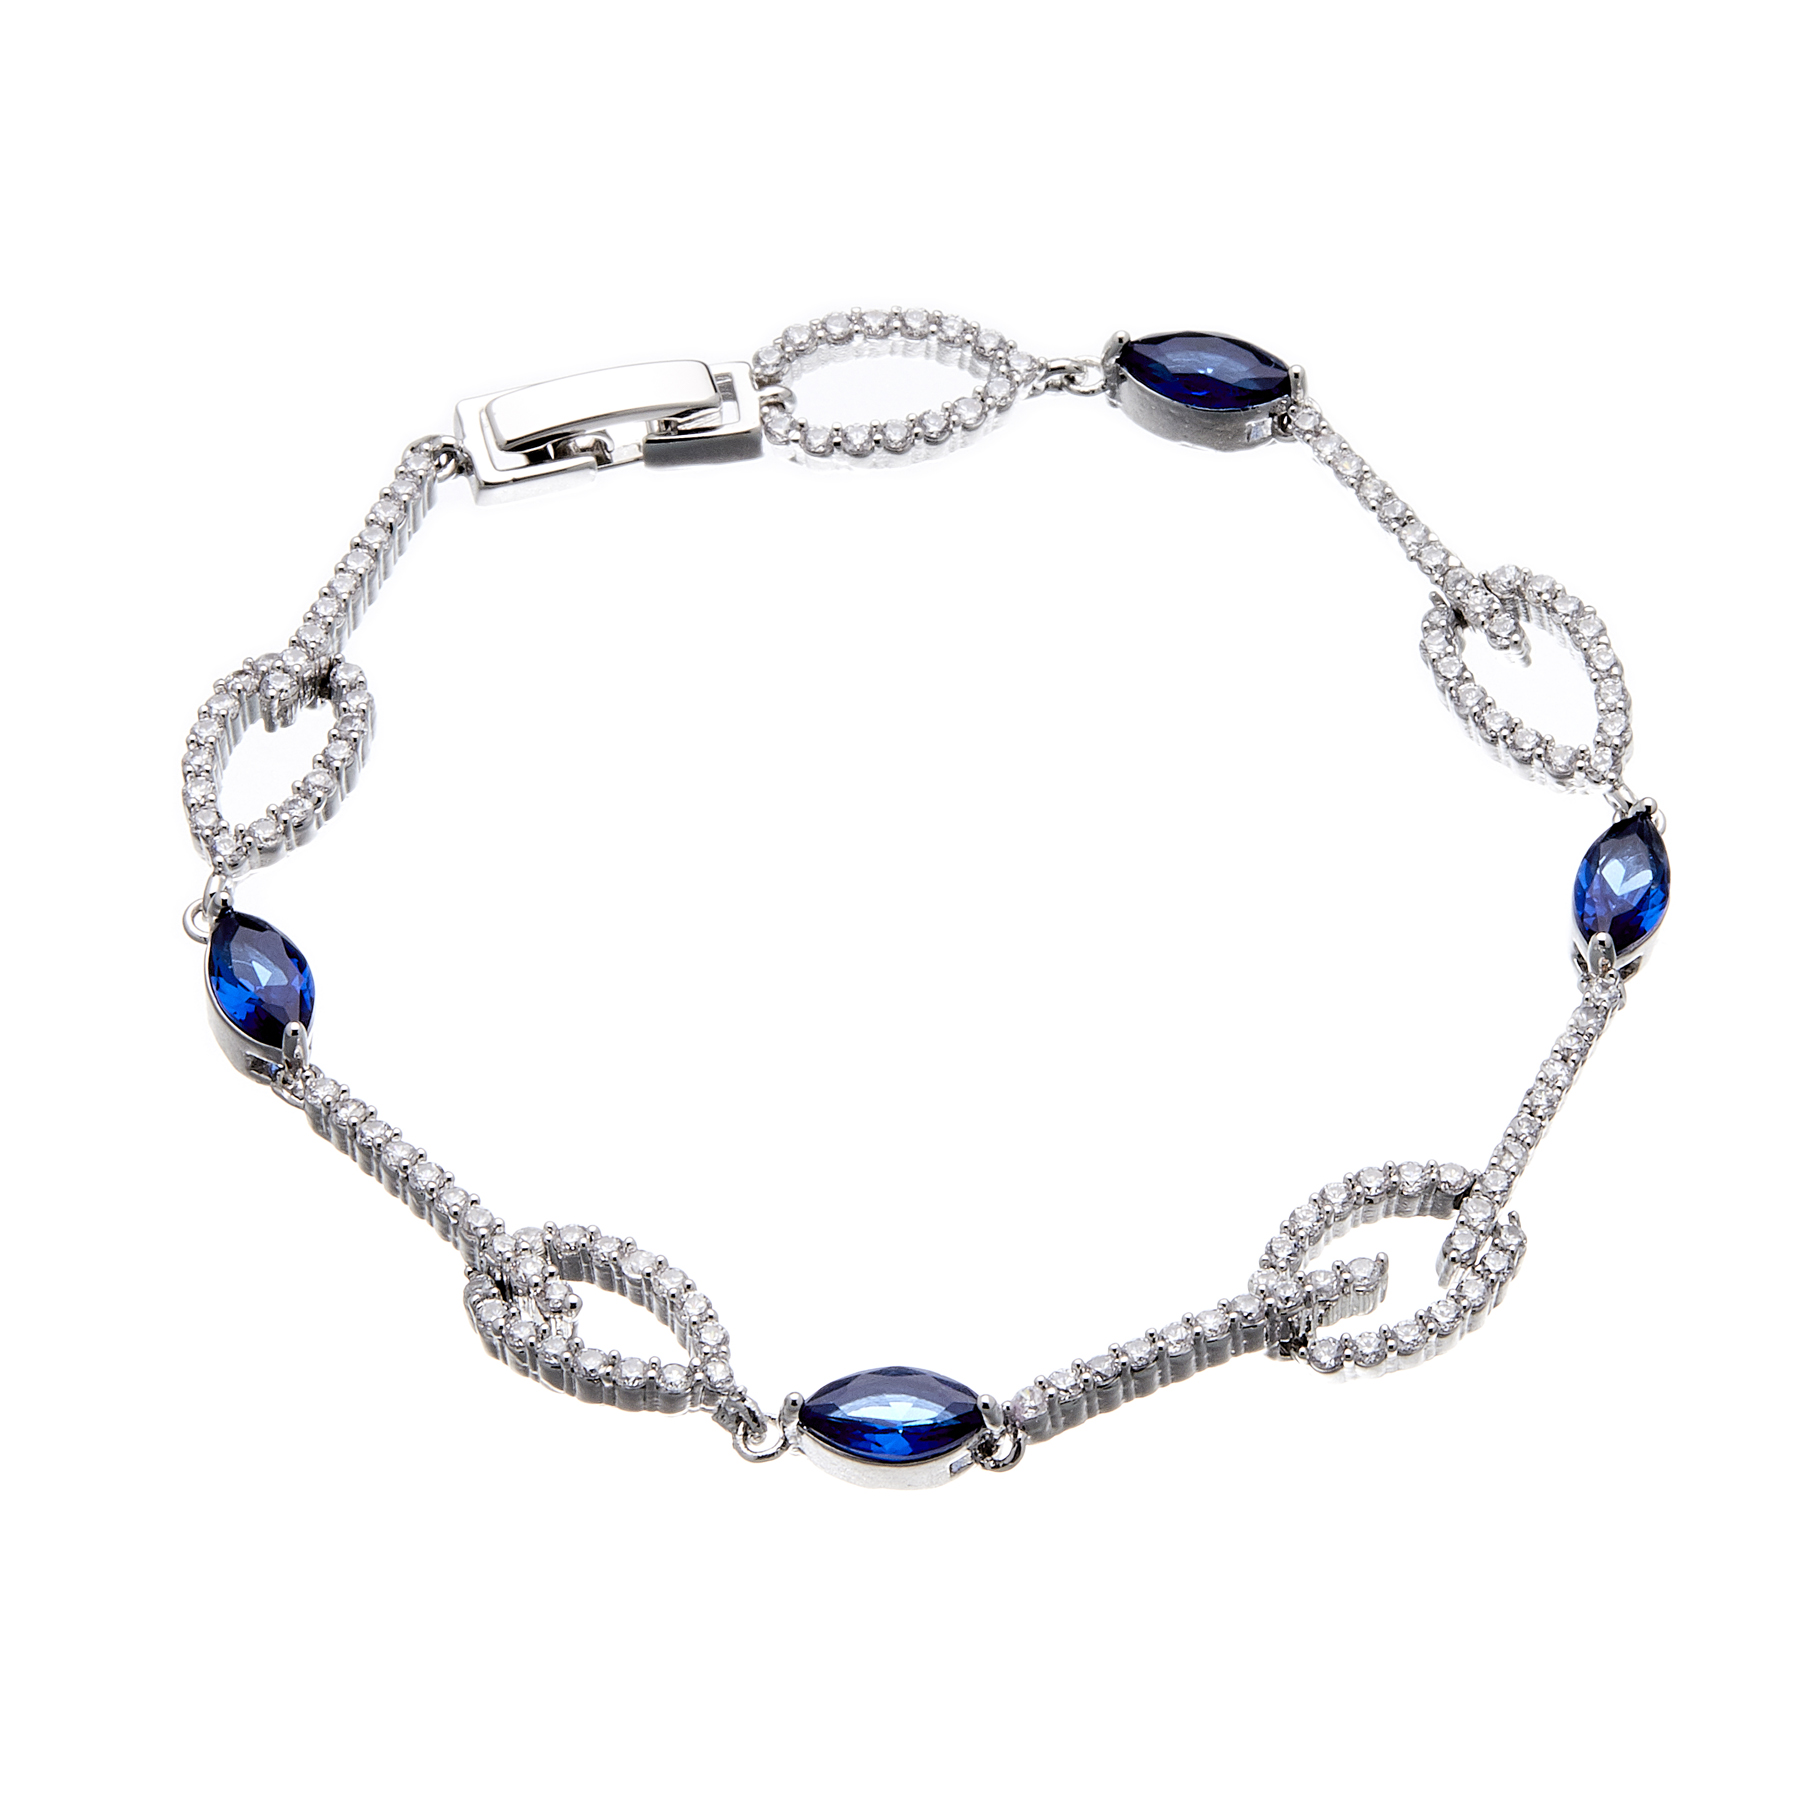 Silver Bracelet with navy blue Cubic Zirconia Stones and clear crystals - Netis